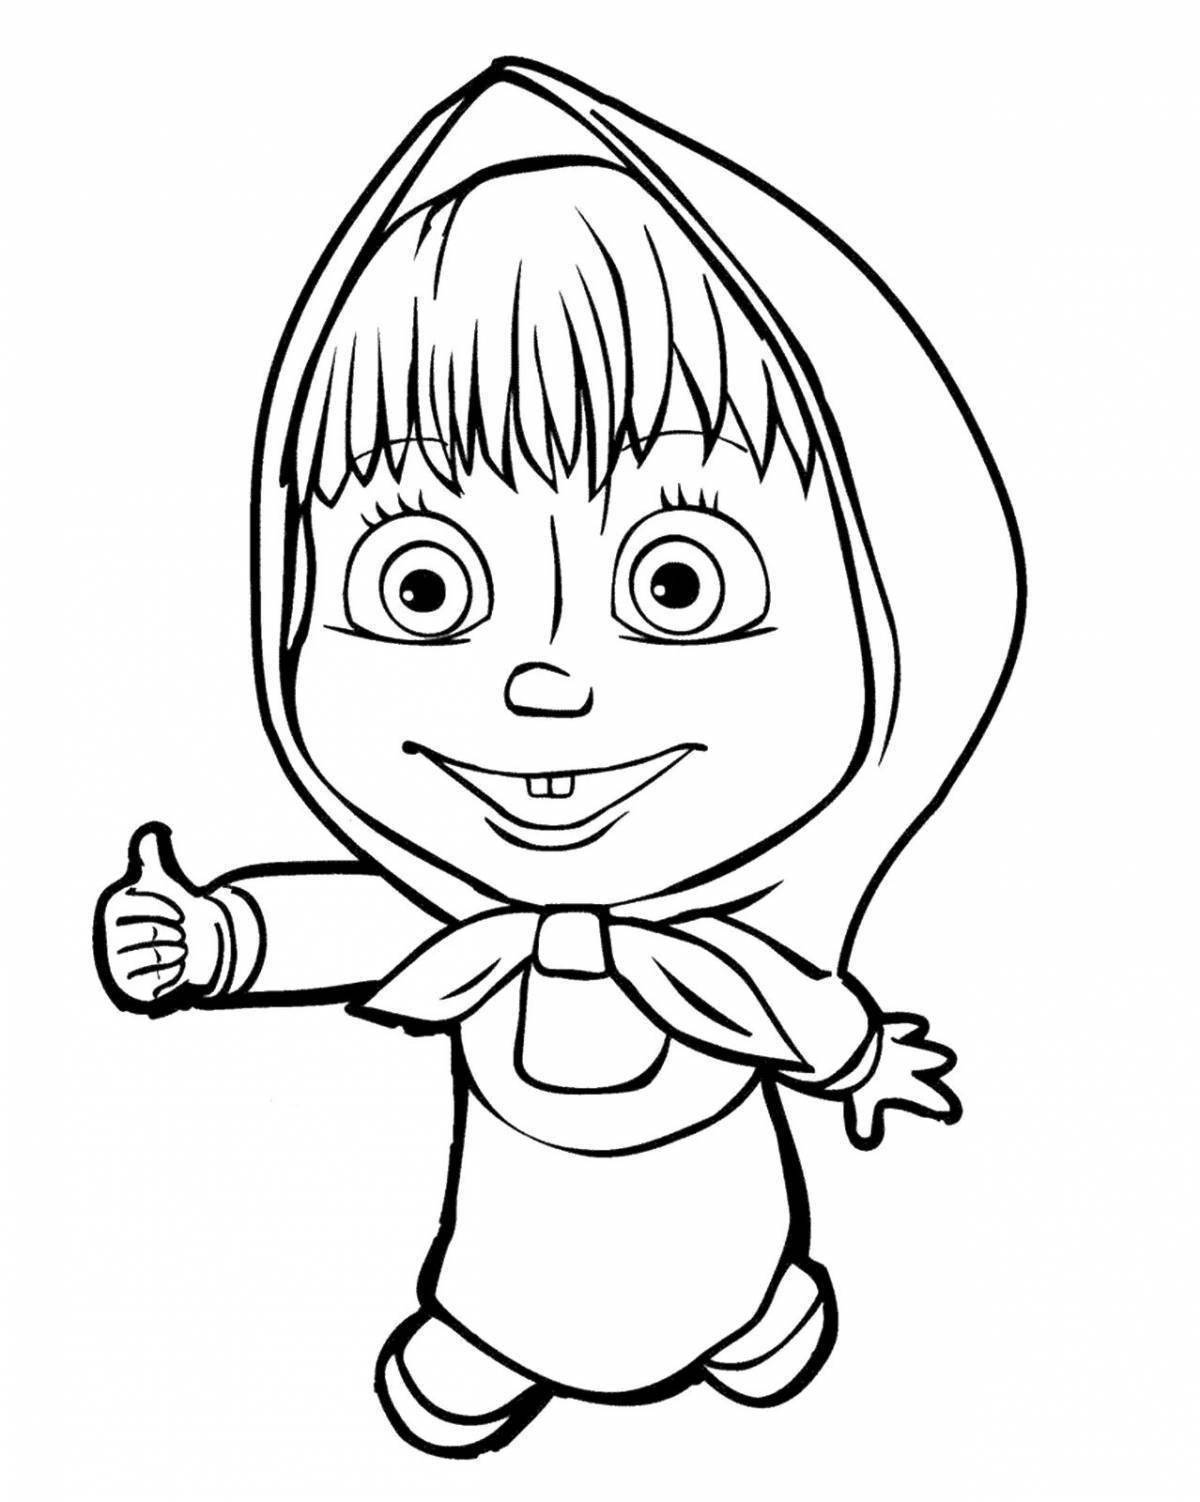 Colorful coloring Masha and the bear for children